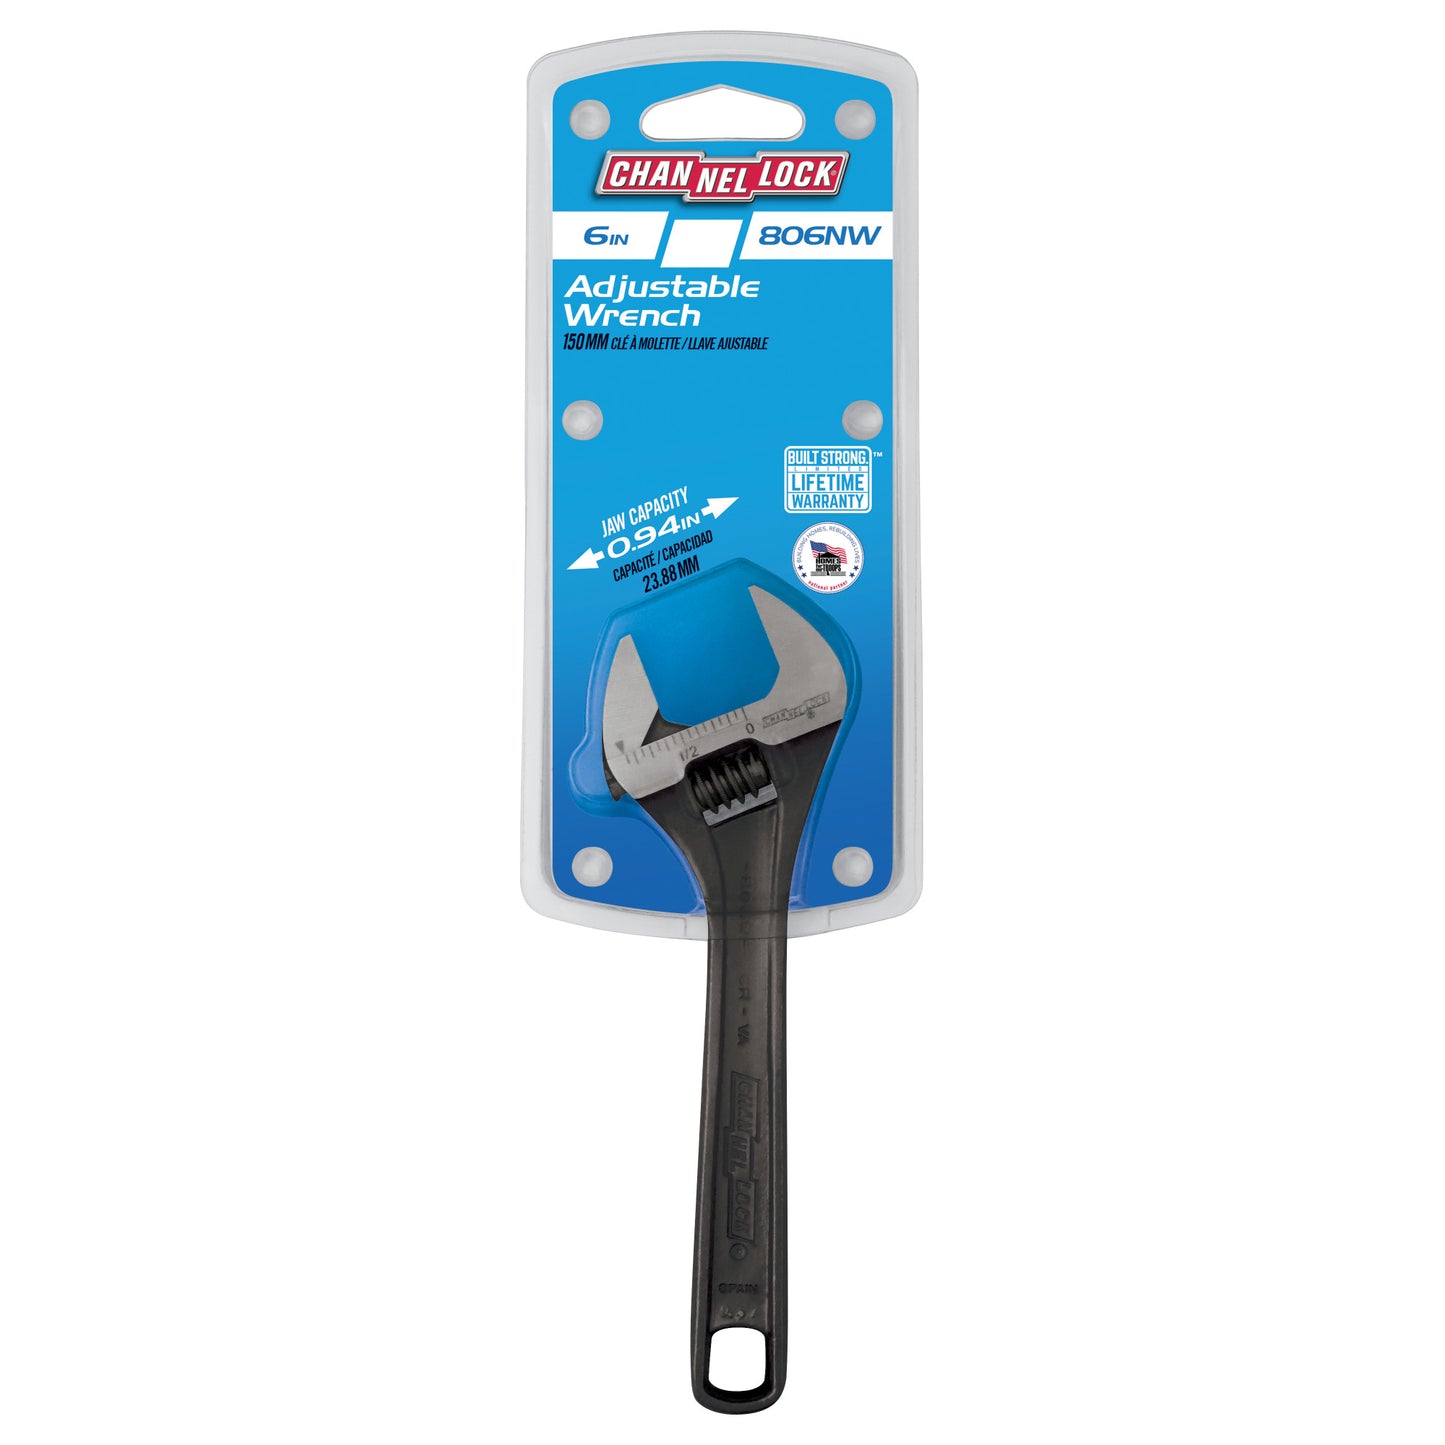 6-inch Adjustable Wrench (806NW)